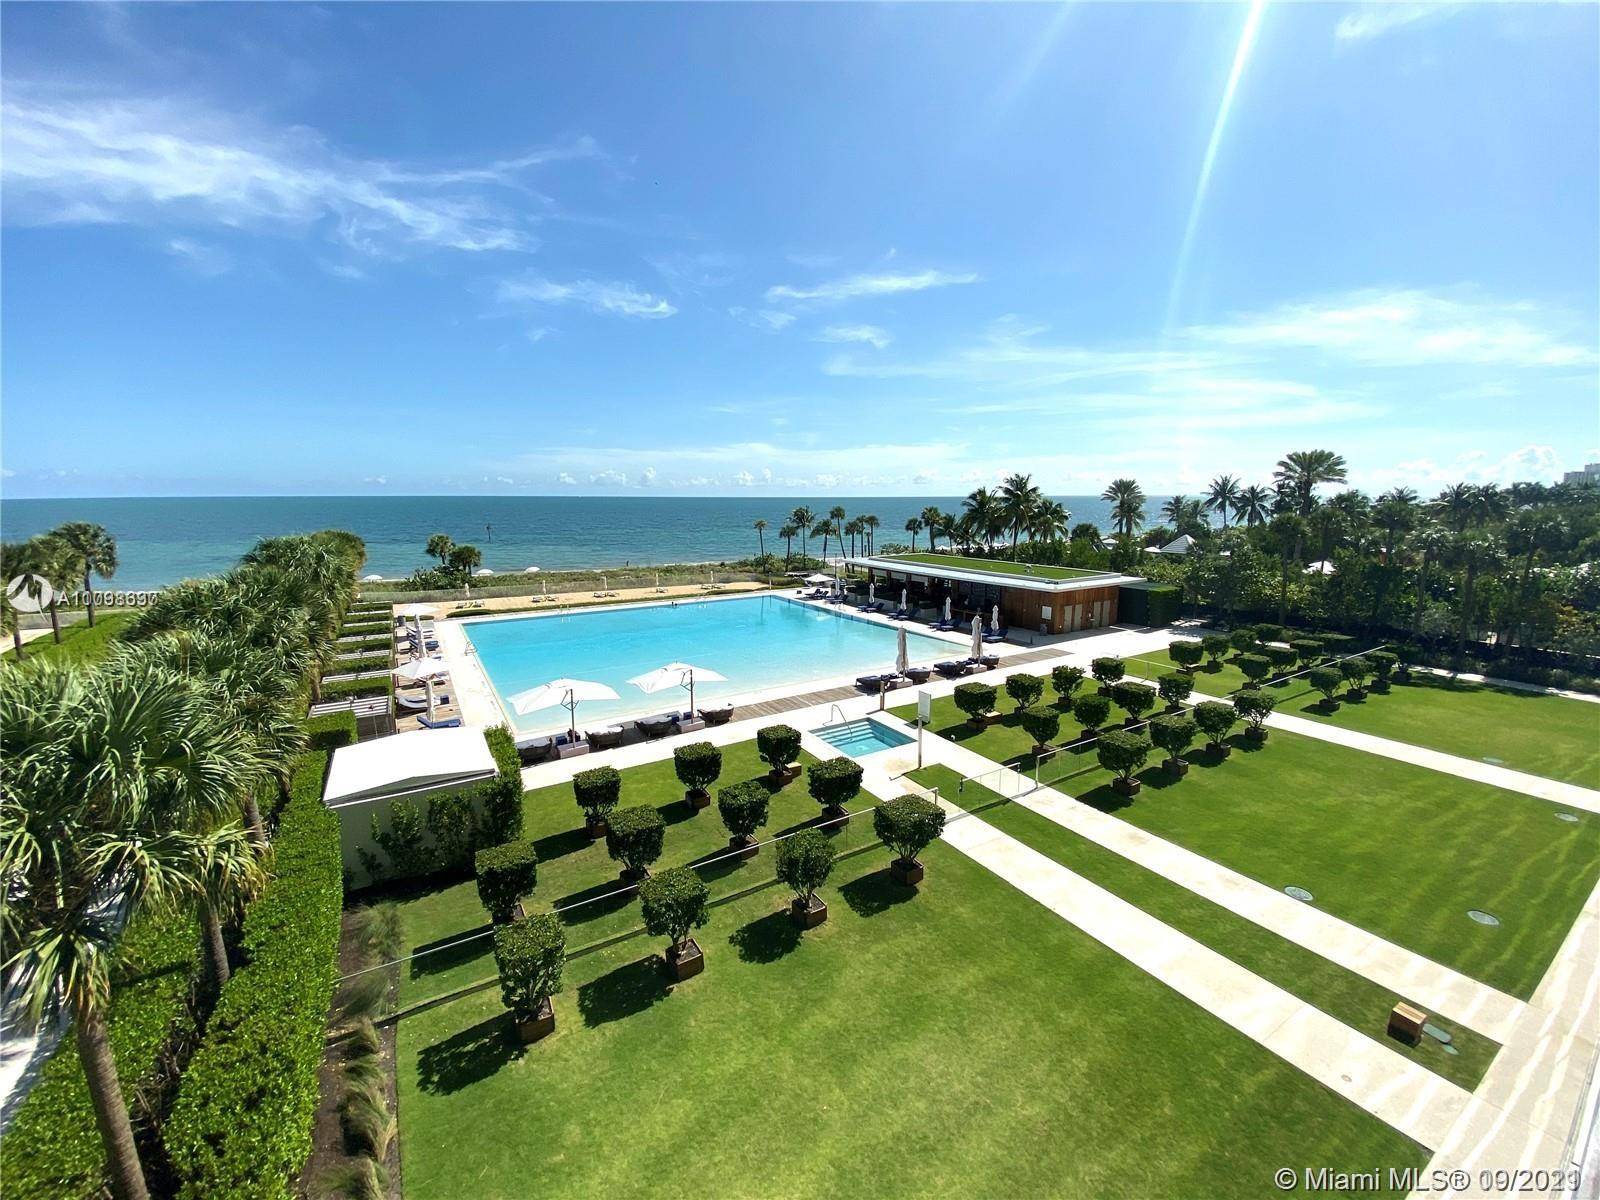 Step inside this one of a kind luxury beach front property featuring 2B 3.